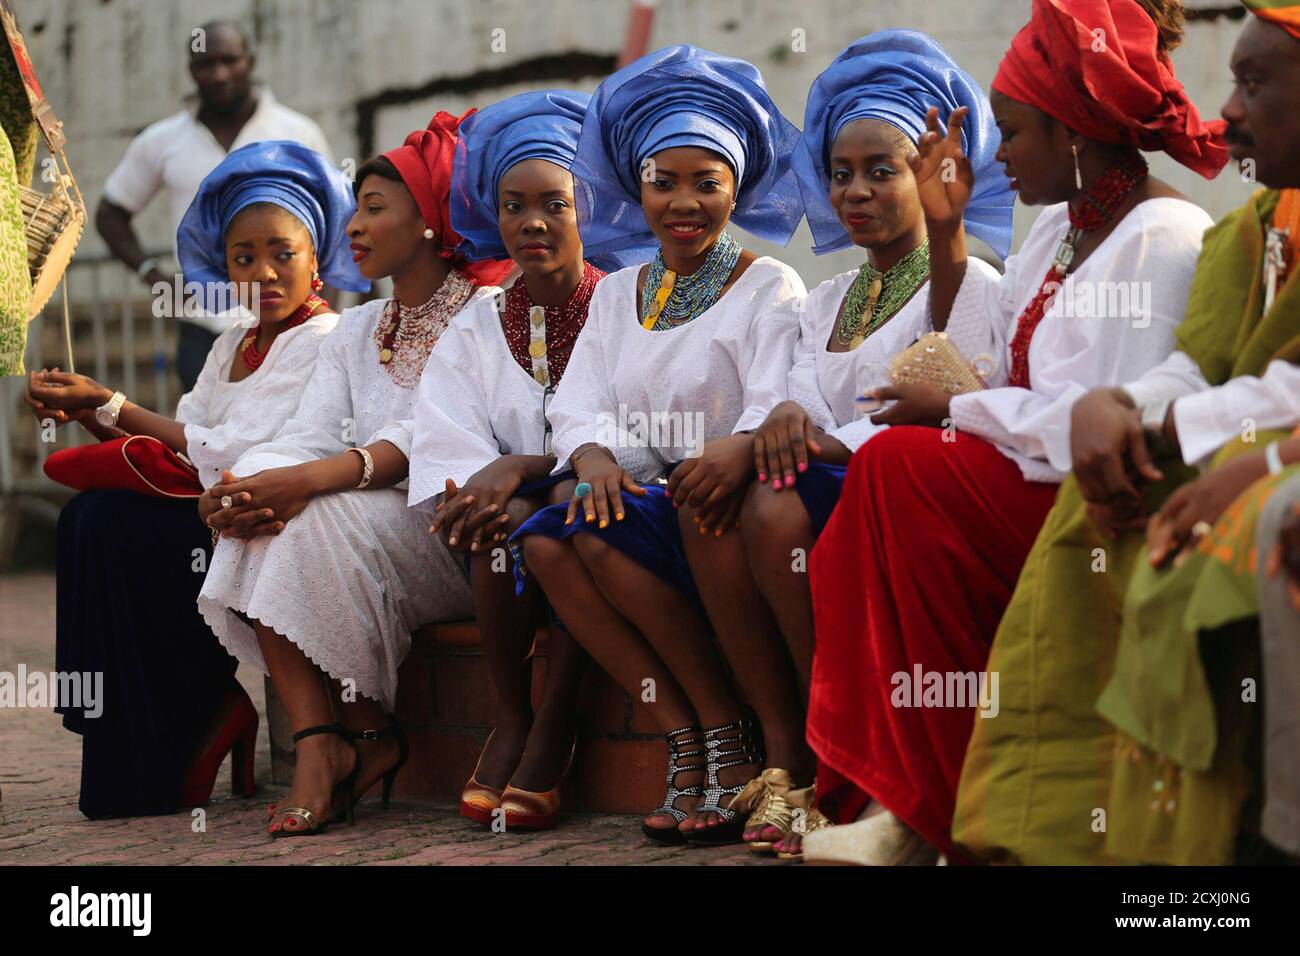 Cast members dressed in traditional attire perform in a scene during the  making of "Dazzling Mirage", directed by Tunde Kelani, at a film location  in Lagos December 19, 2013. Nigeria's movie business,